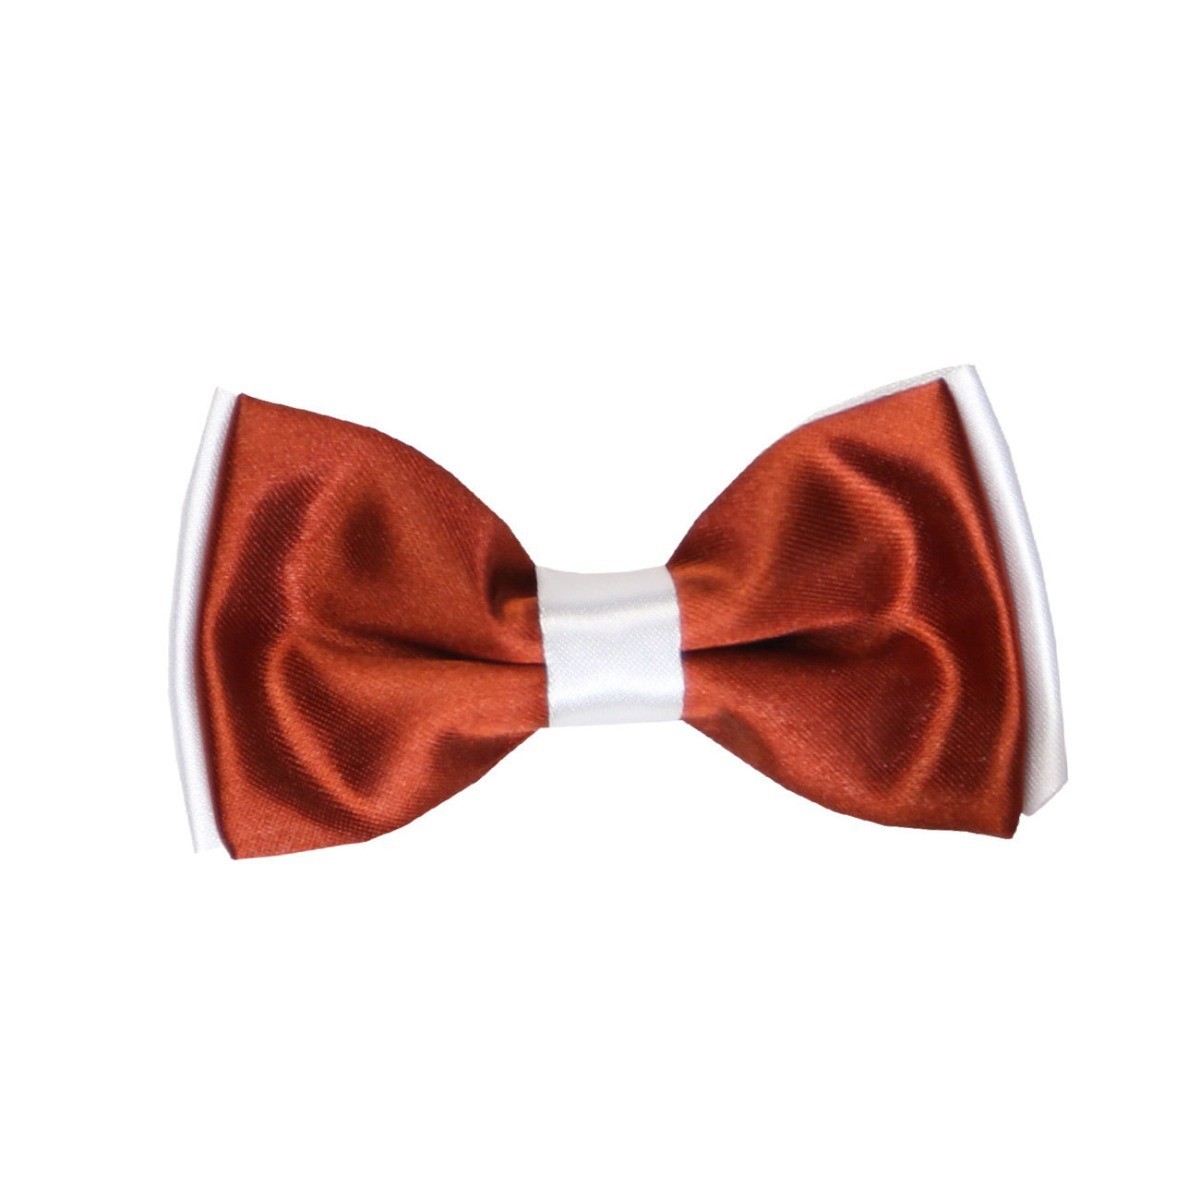 Boys Two-Toned Layered Adjustable Bowtie - Moroon and White